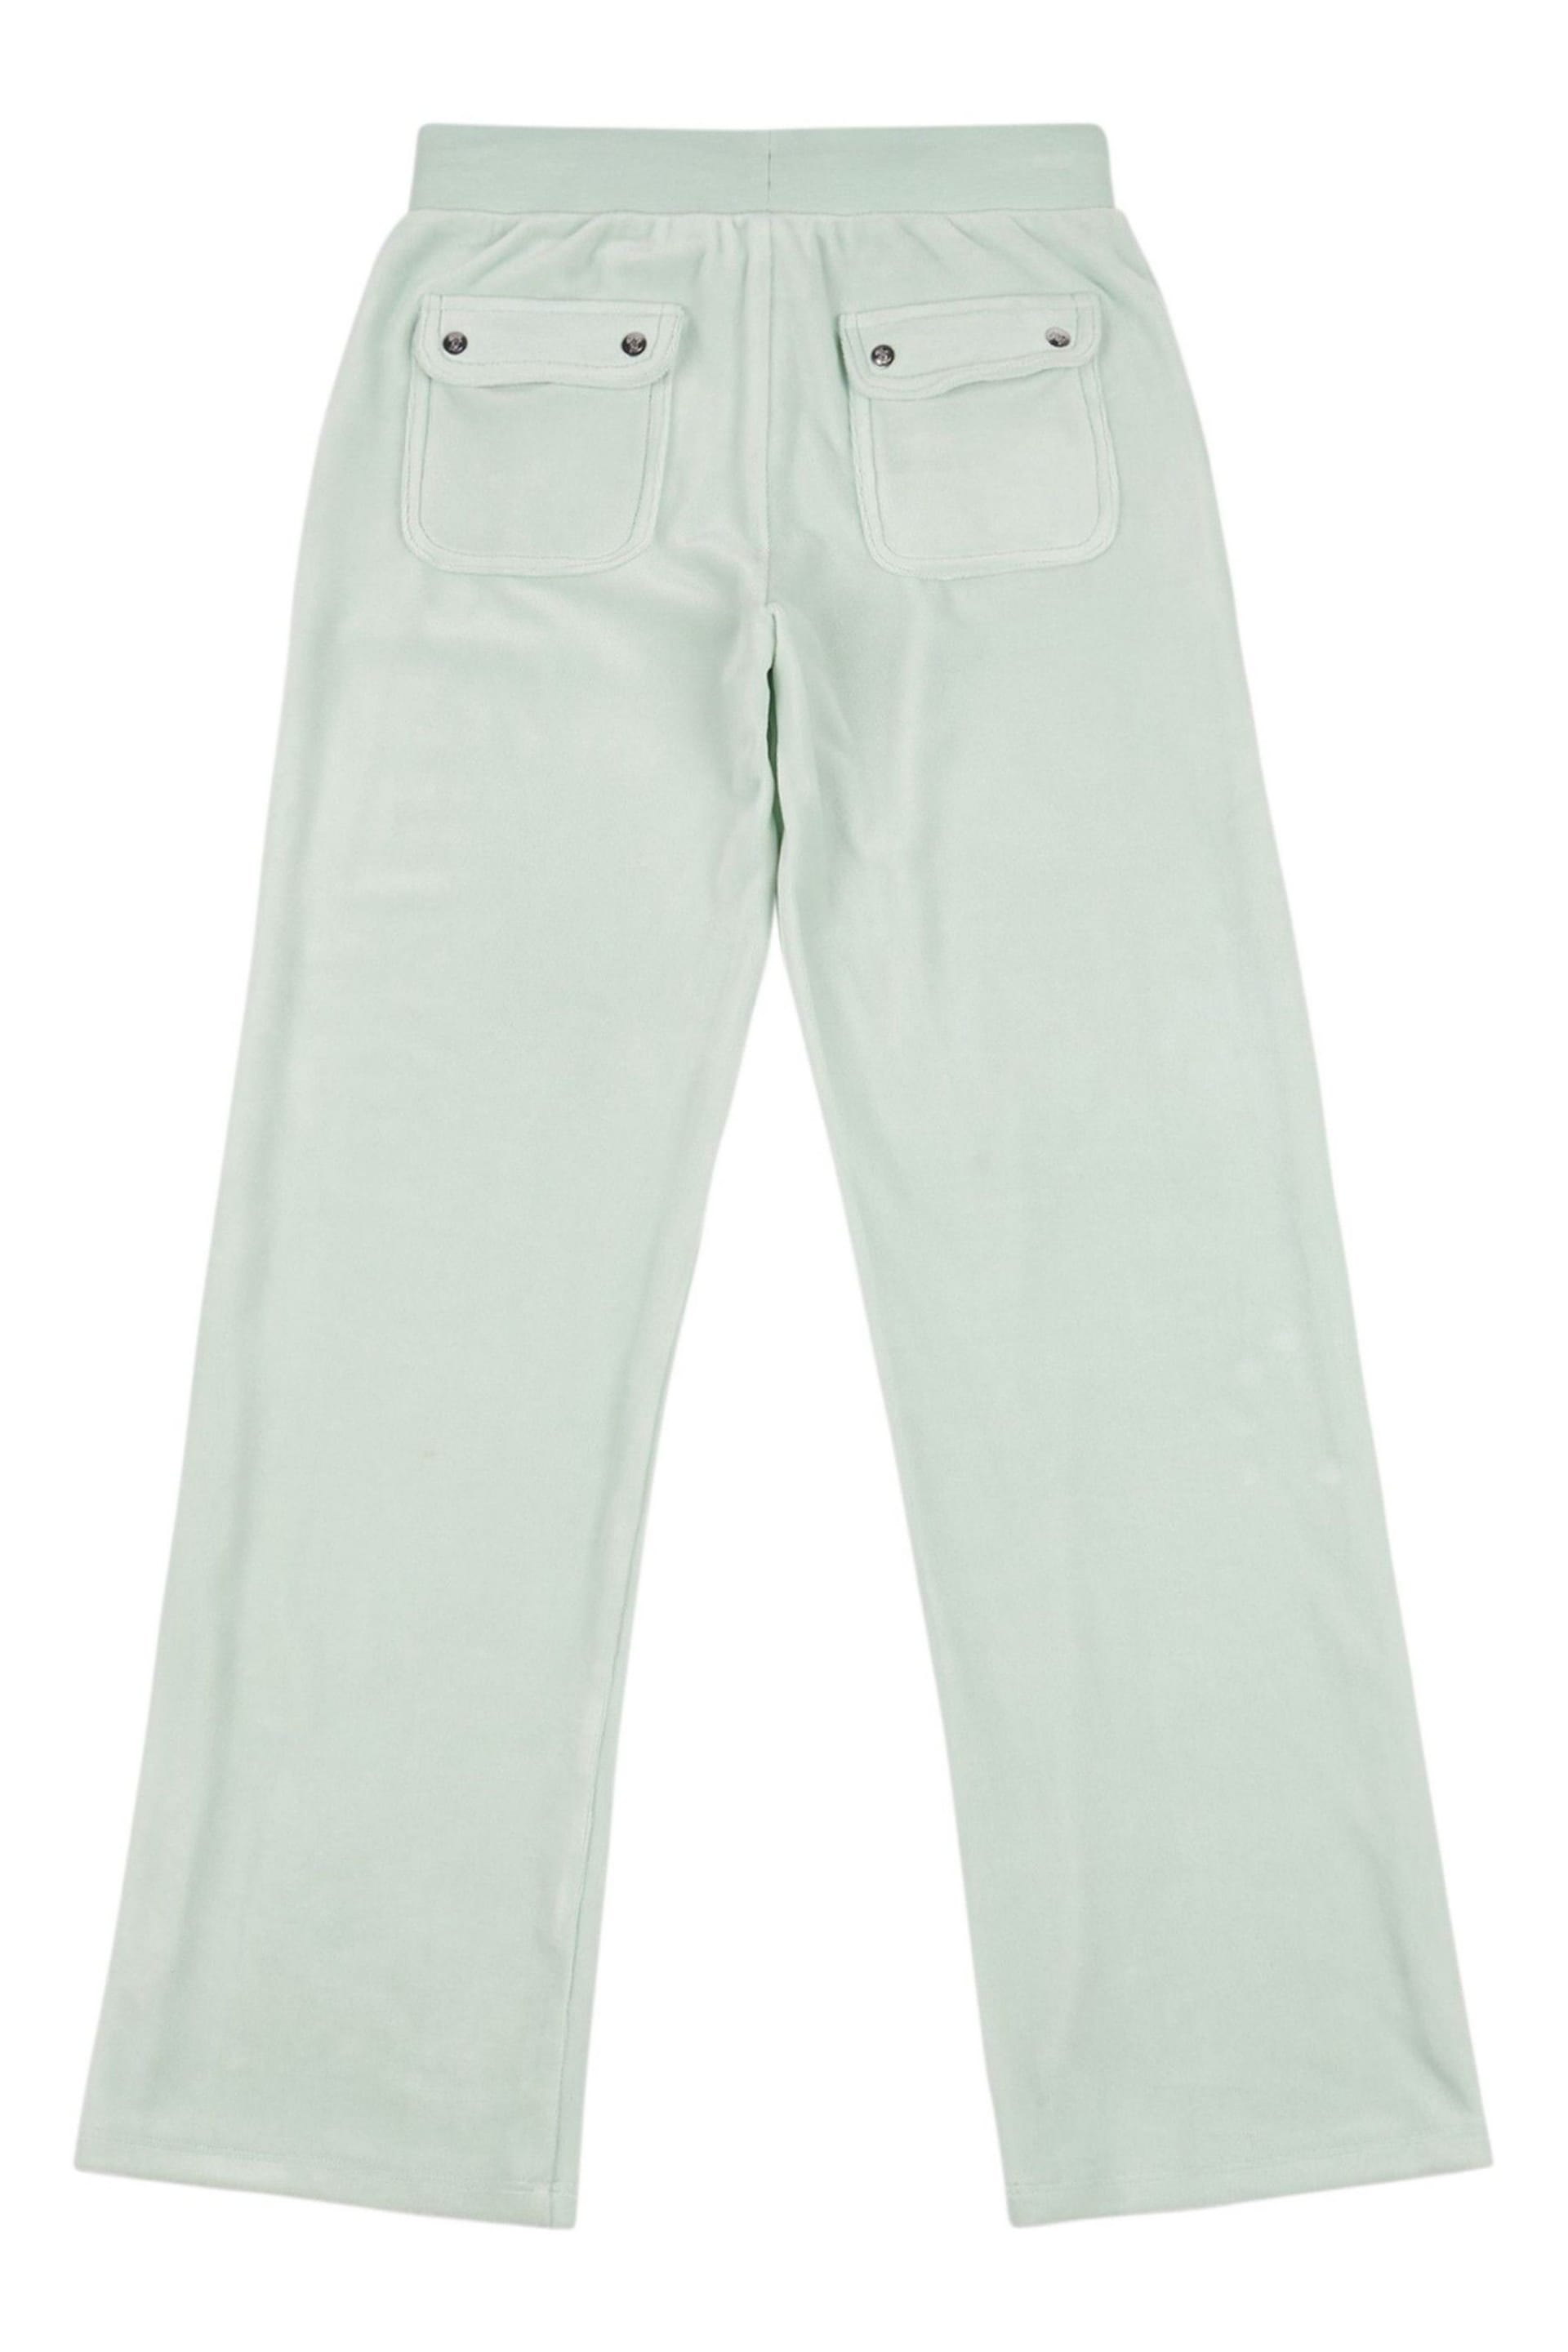 Juicy Couture Tonal Wide Leg Joggers - Image 6 of 7